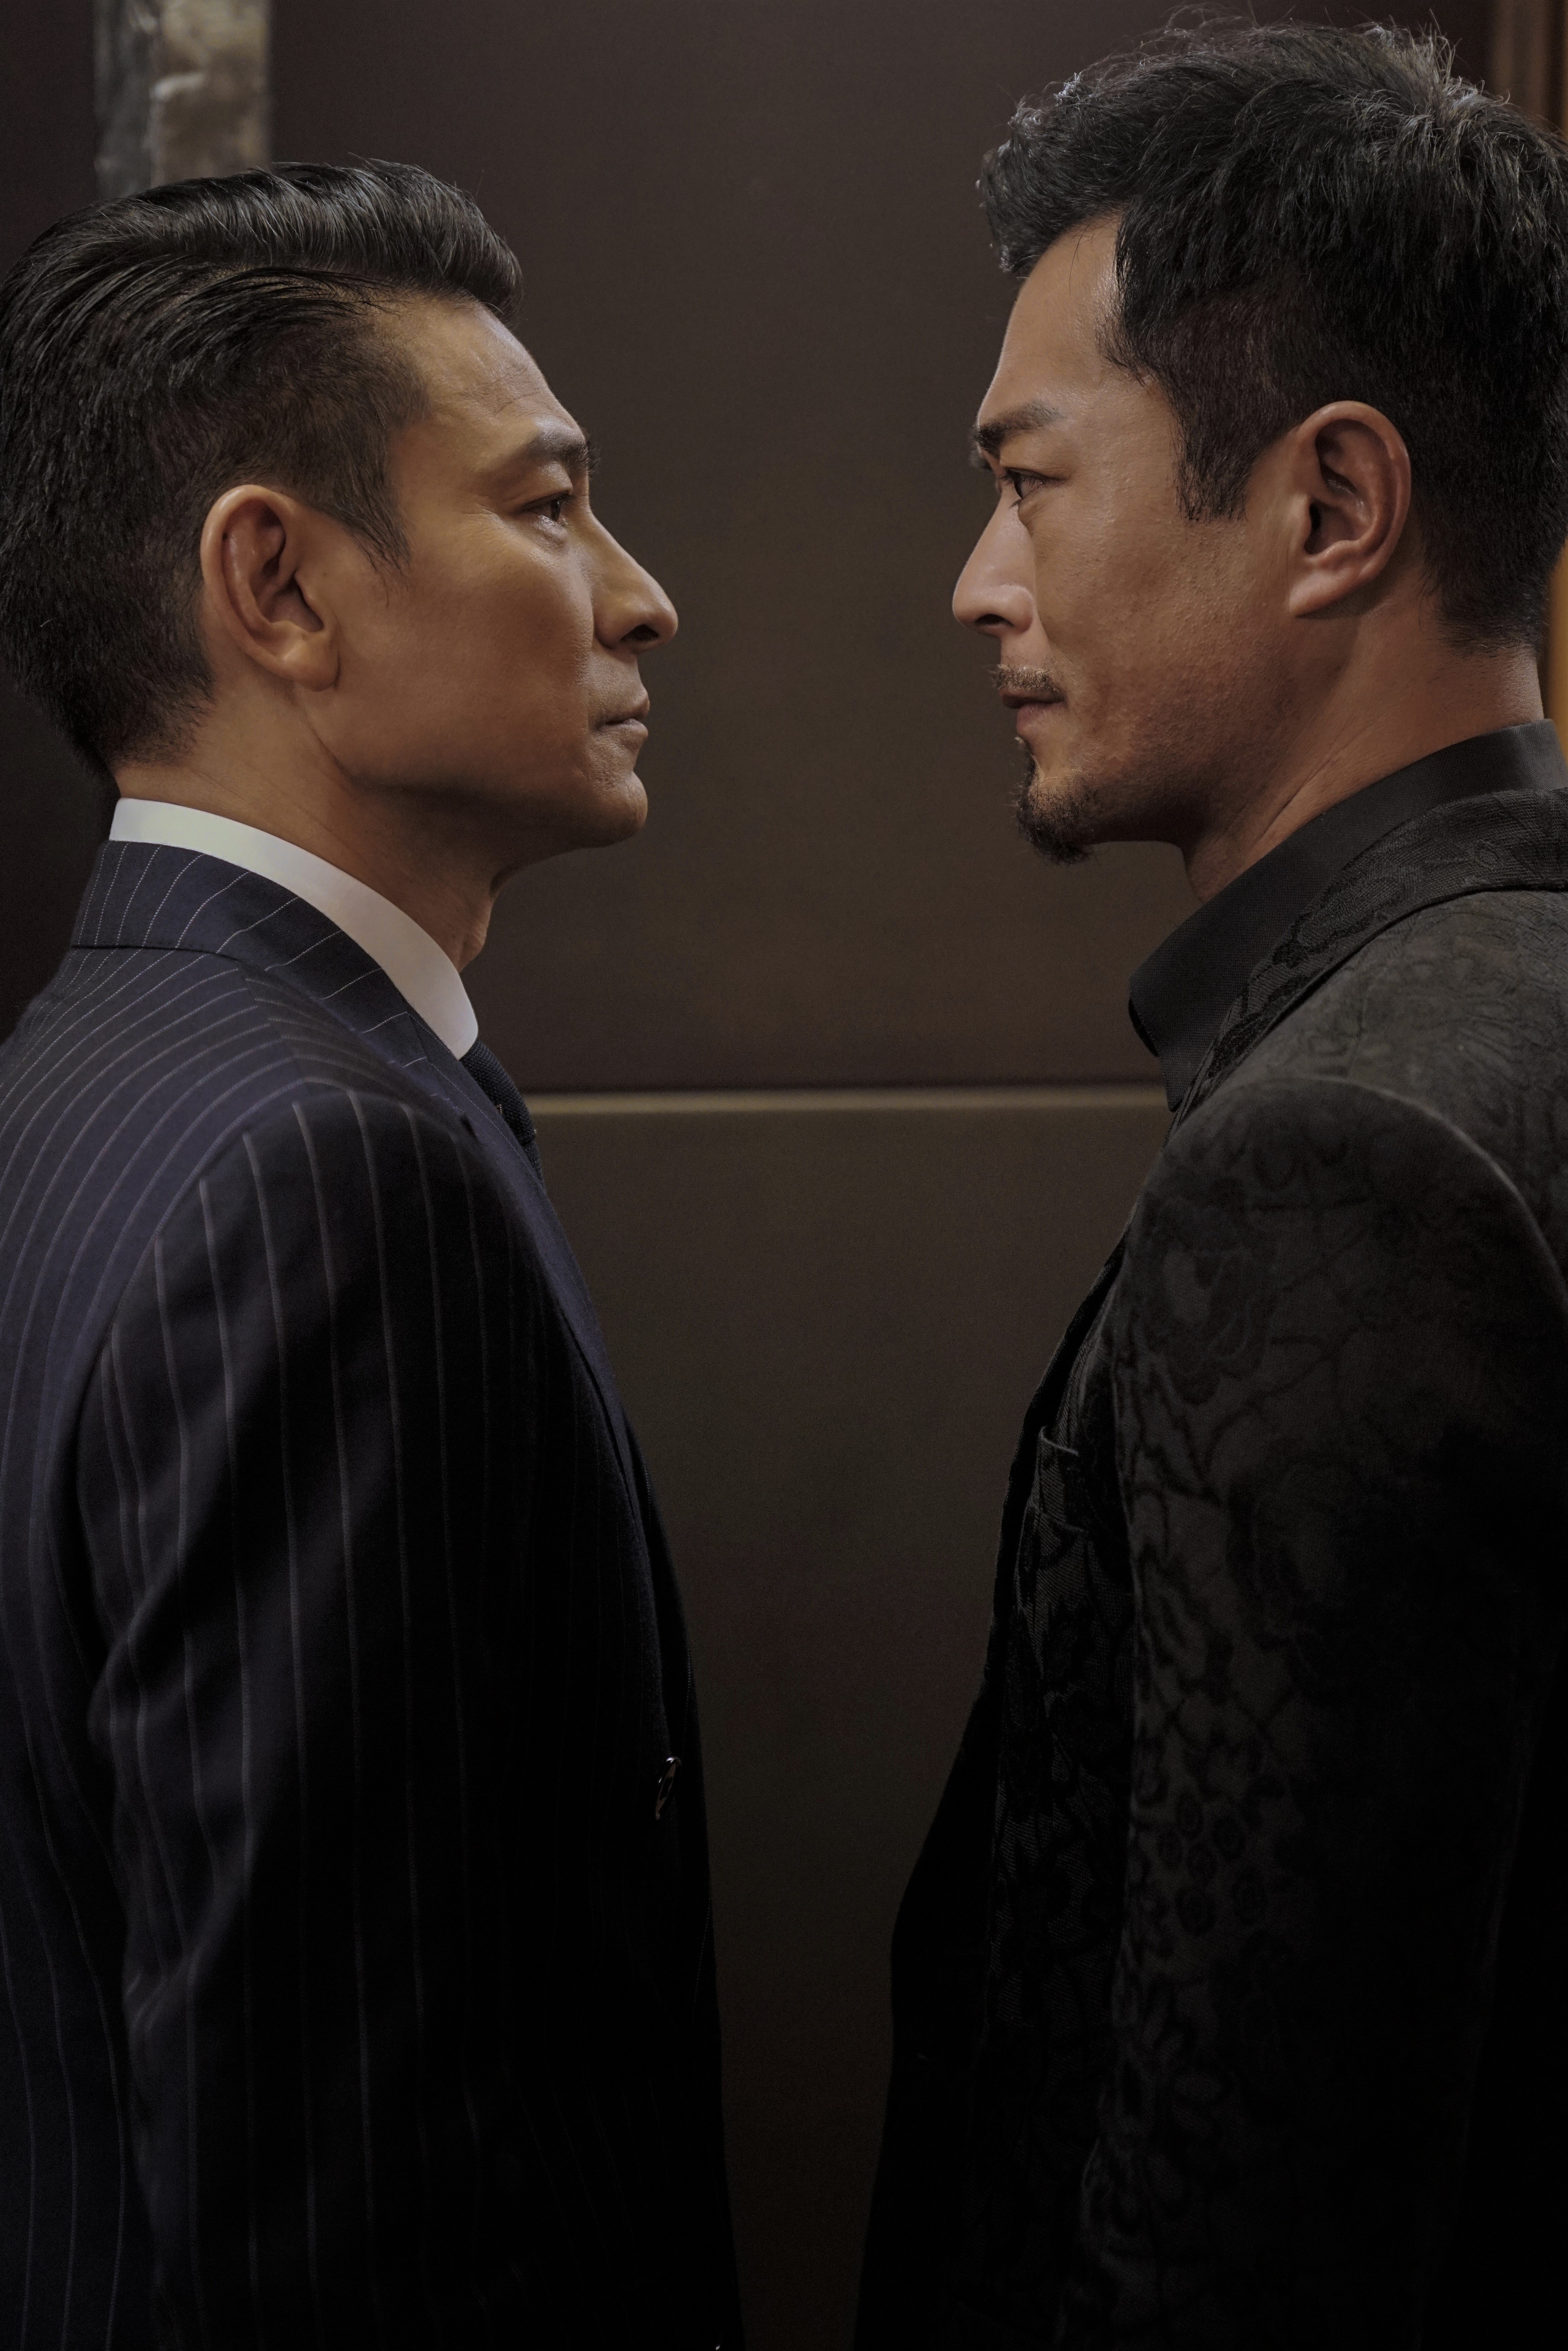 Andy Lau and Louis Koo in a still from The White Storm 2: Drug Lords.